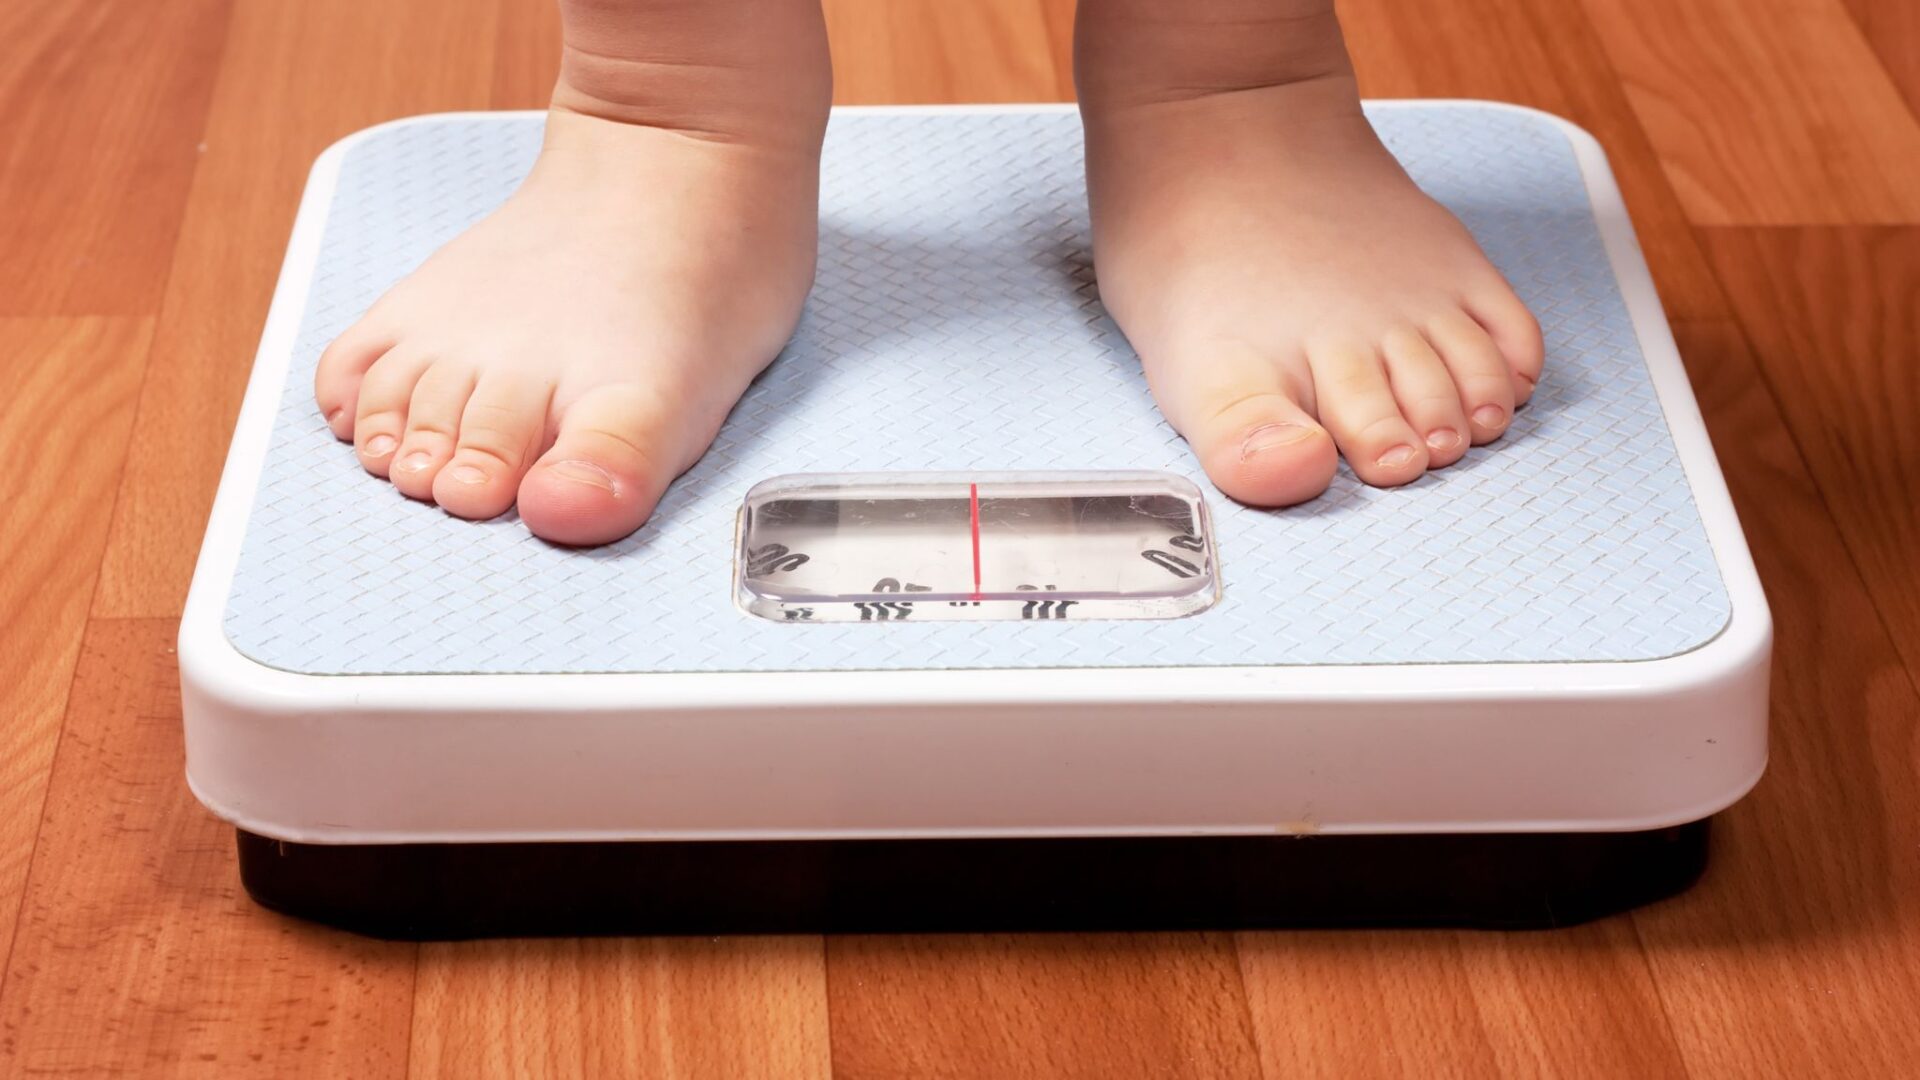 Should Reception & Year 6 children be weighed at school?